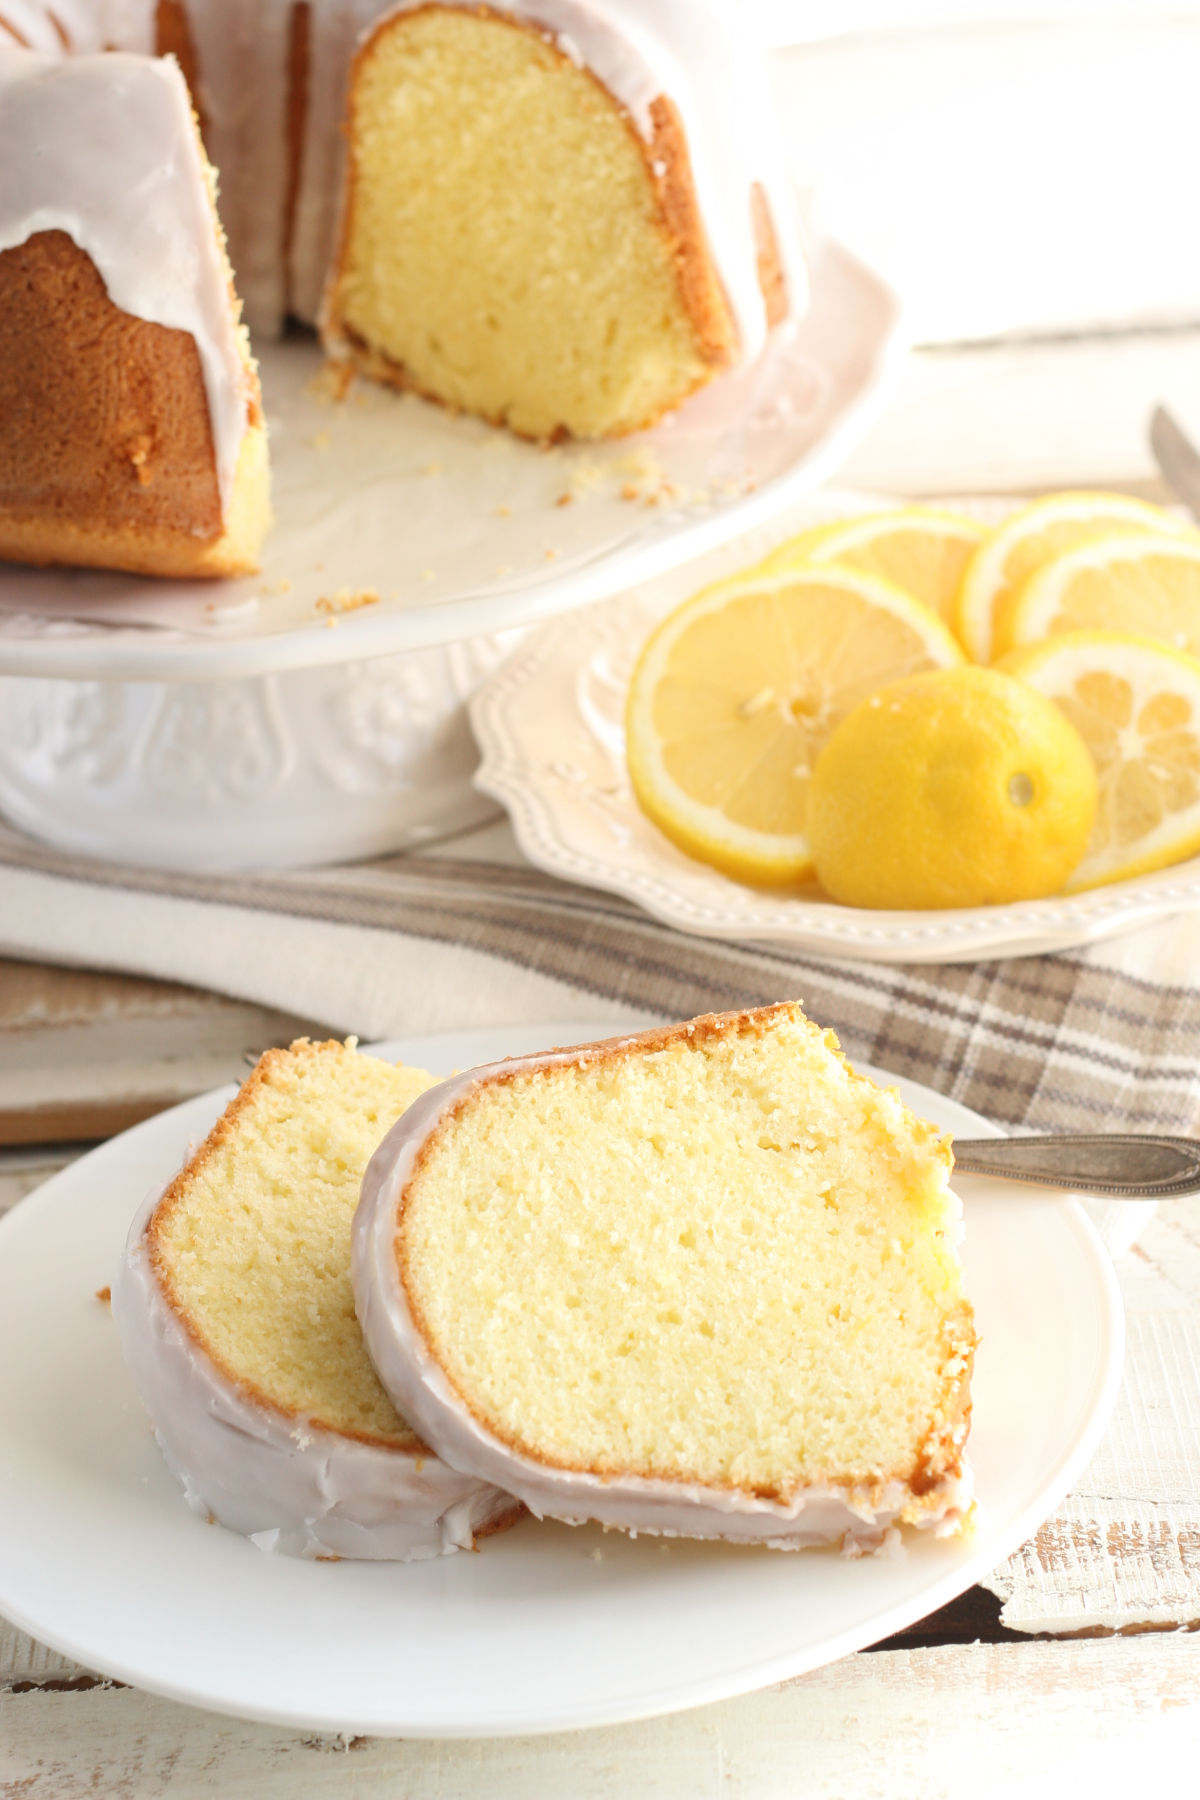 Slices of lemon Bundt cake with icing on small white plate.